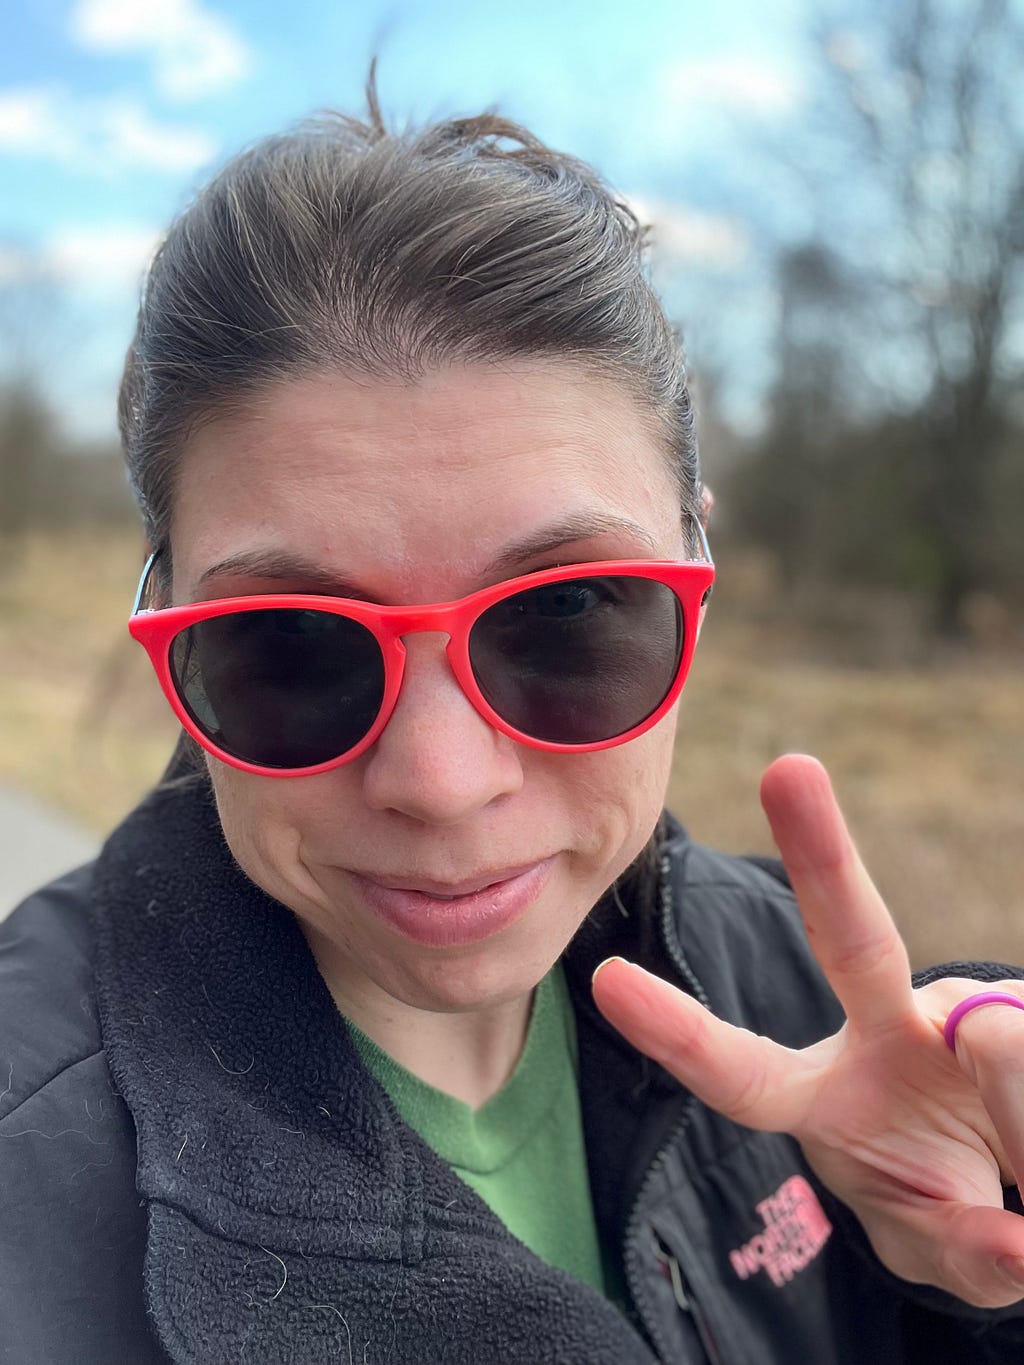 Bri wearing orange sunglasses, on a walking trail in the woods, smiling at the camera and giving the peace sign.